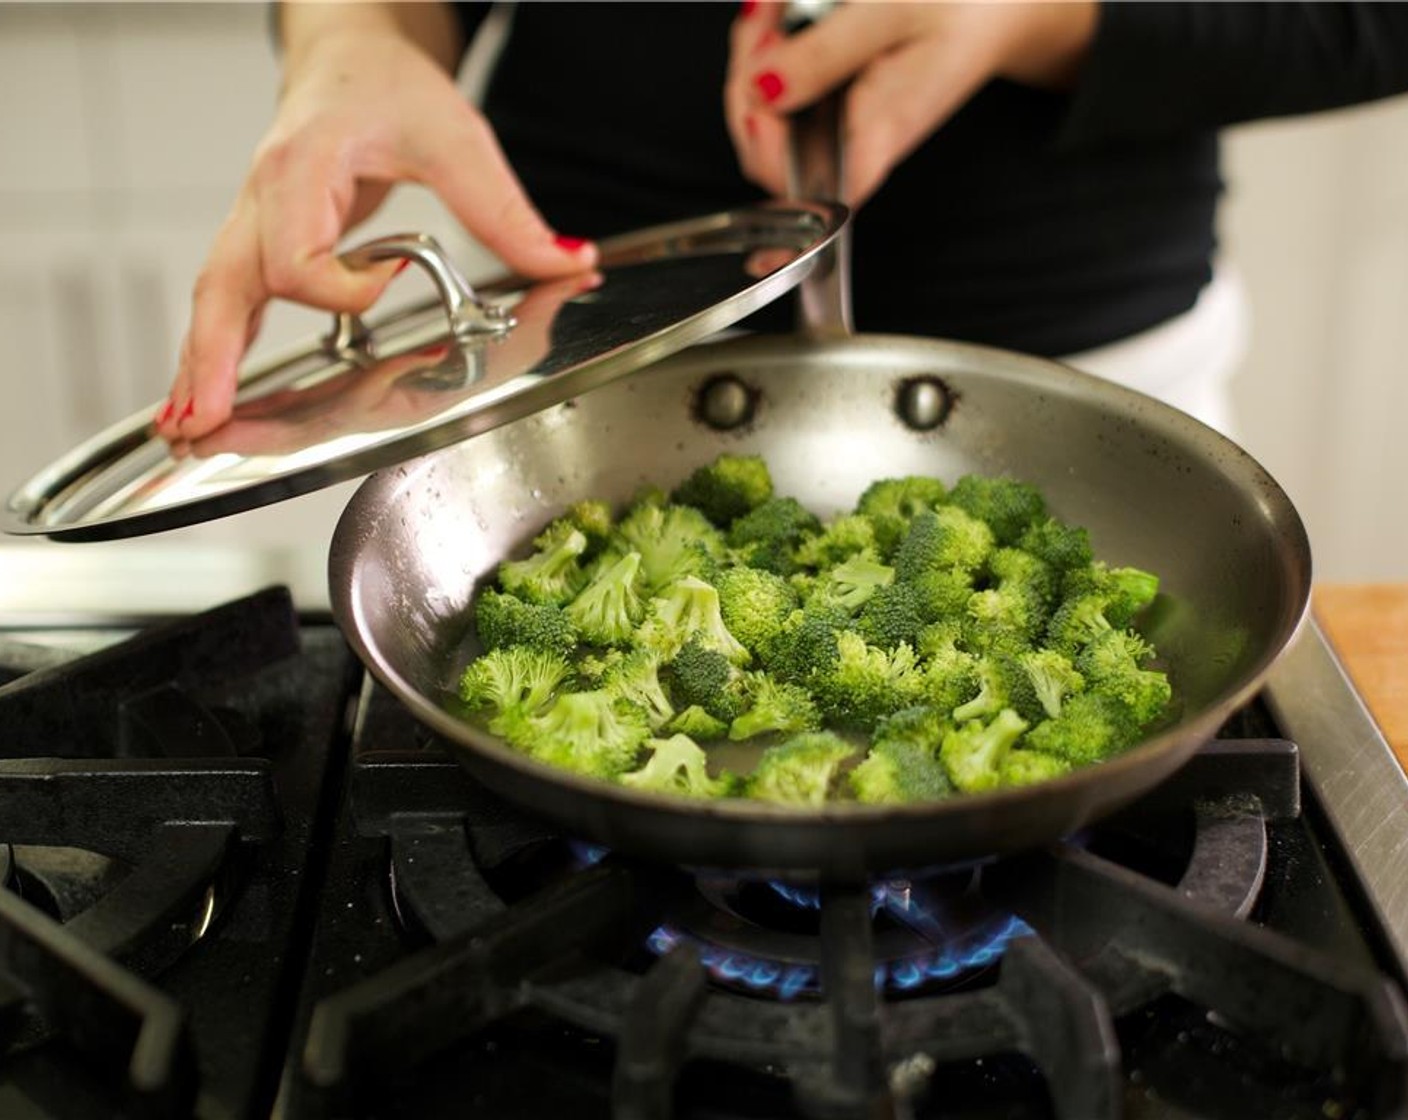 step 7 To the same pan used for the mushrooms, add the broccoli florets and a half cup of water and cover. Let the broccoli steam over medium heat for 3 minutes. Remove from heat and uncover.